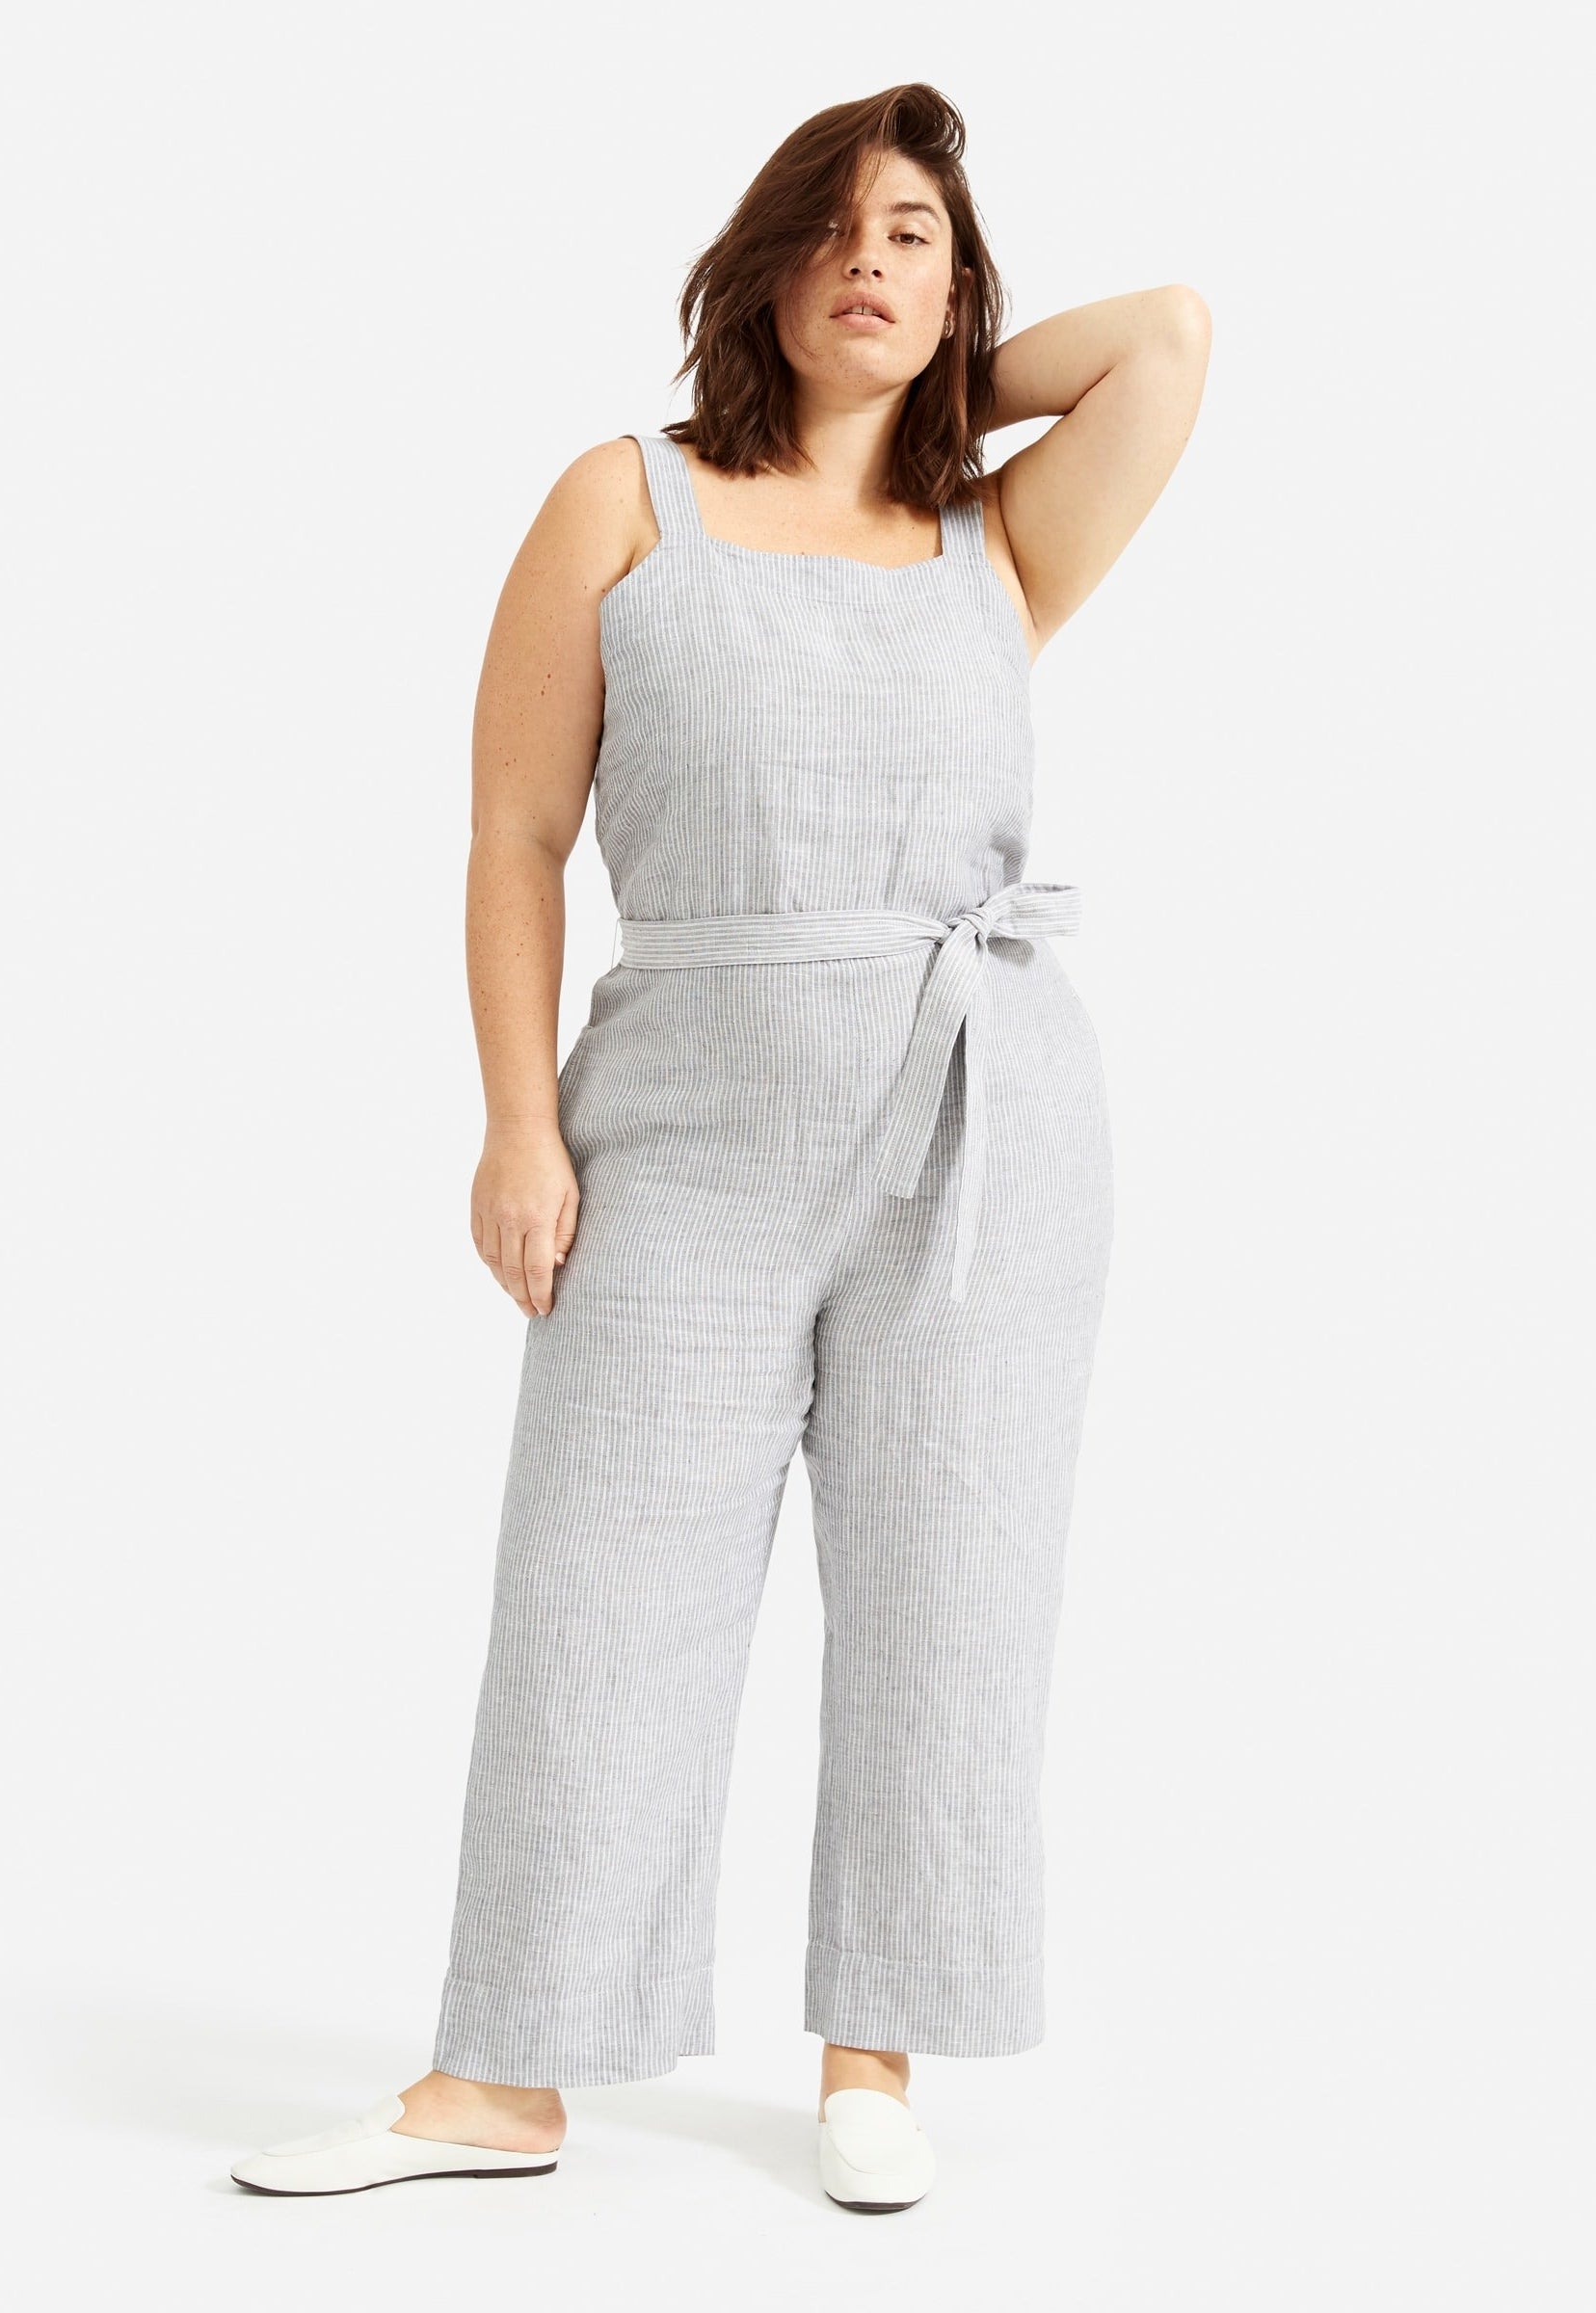 21 Clothing Items From Everlane That People Love